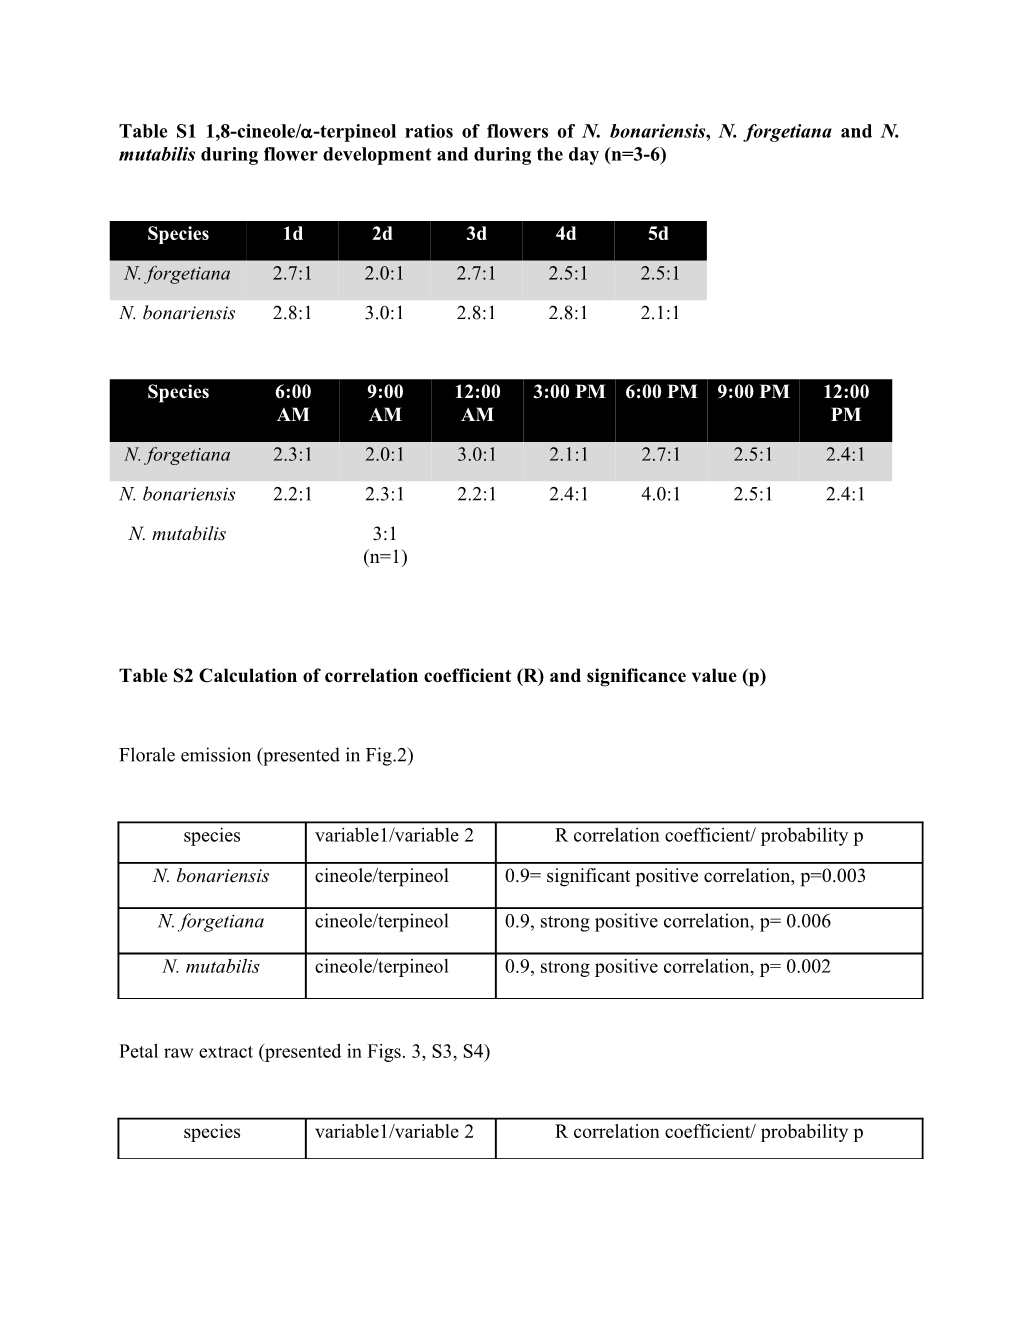 Table S2 Calculation of Correlation Coefficient (R) and Significance Value (P)